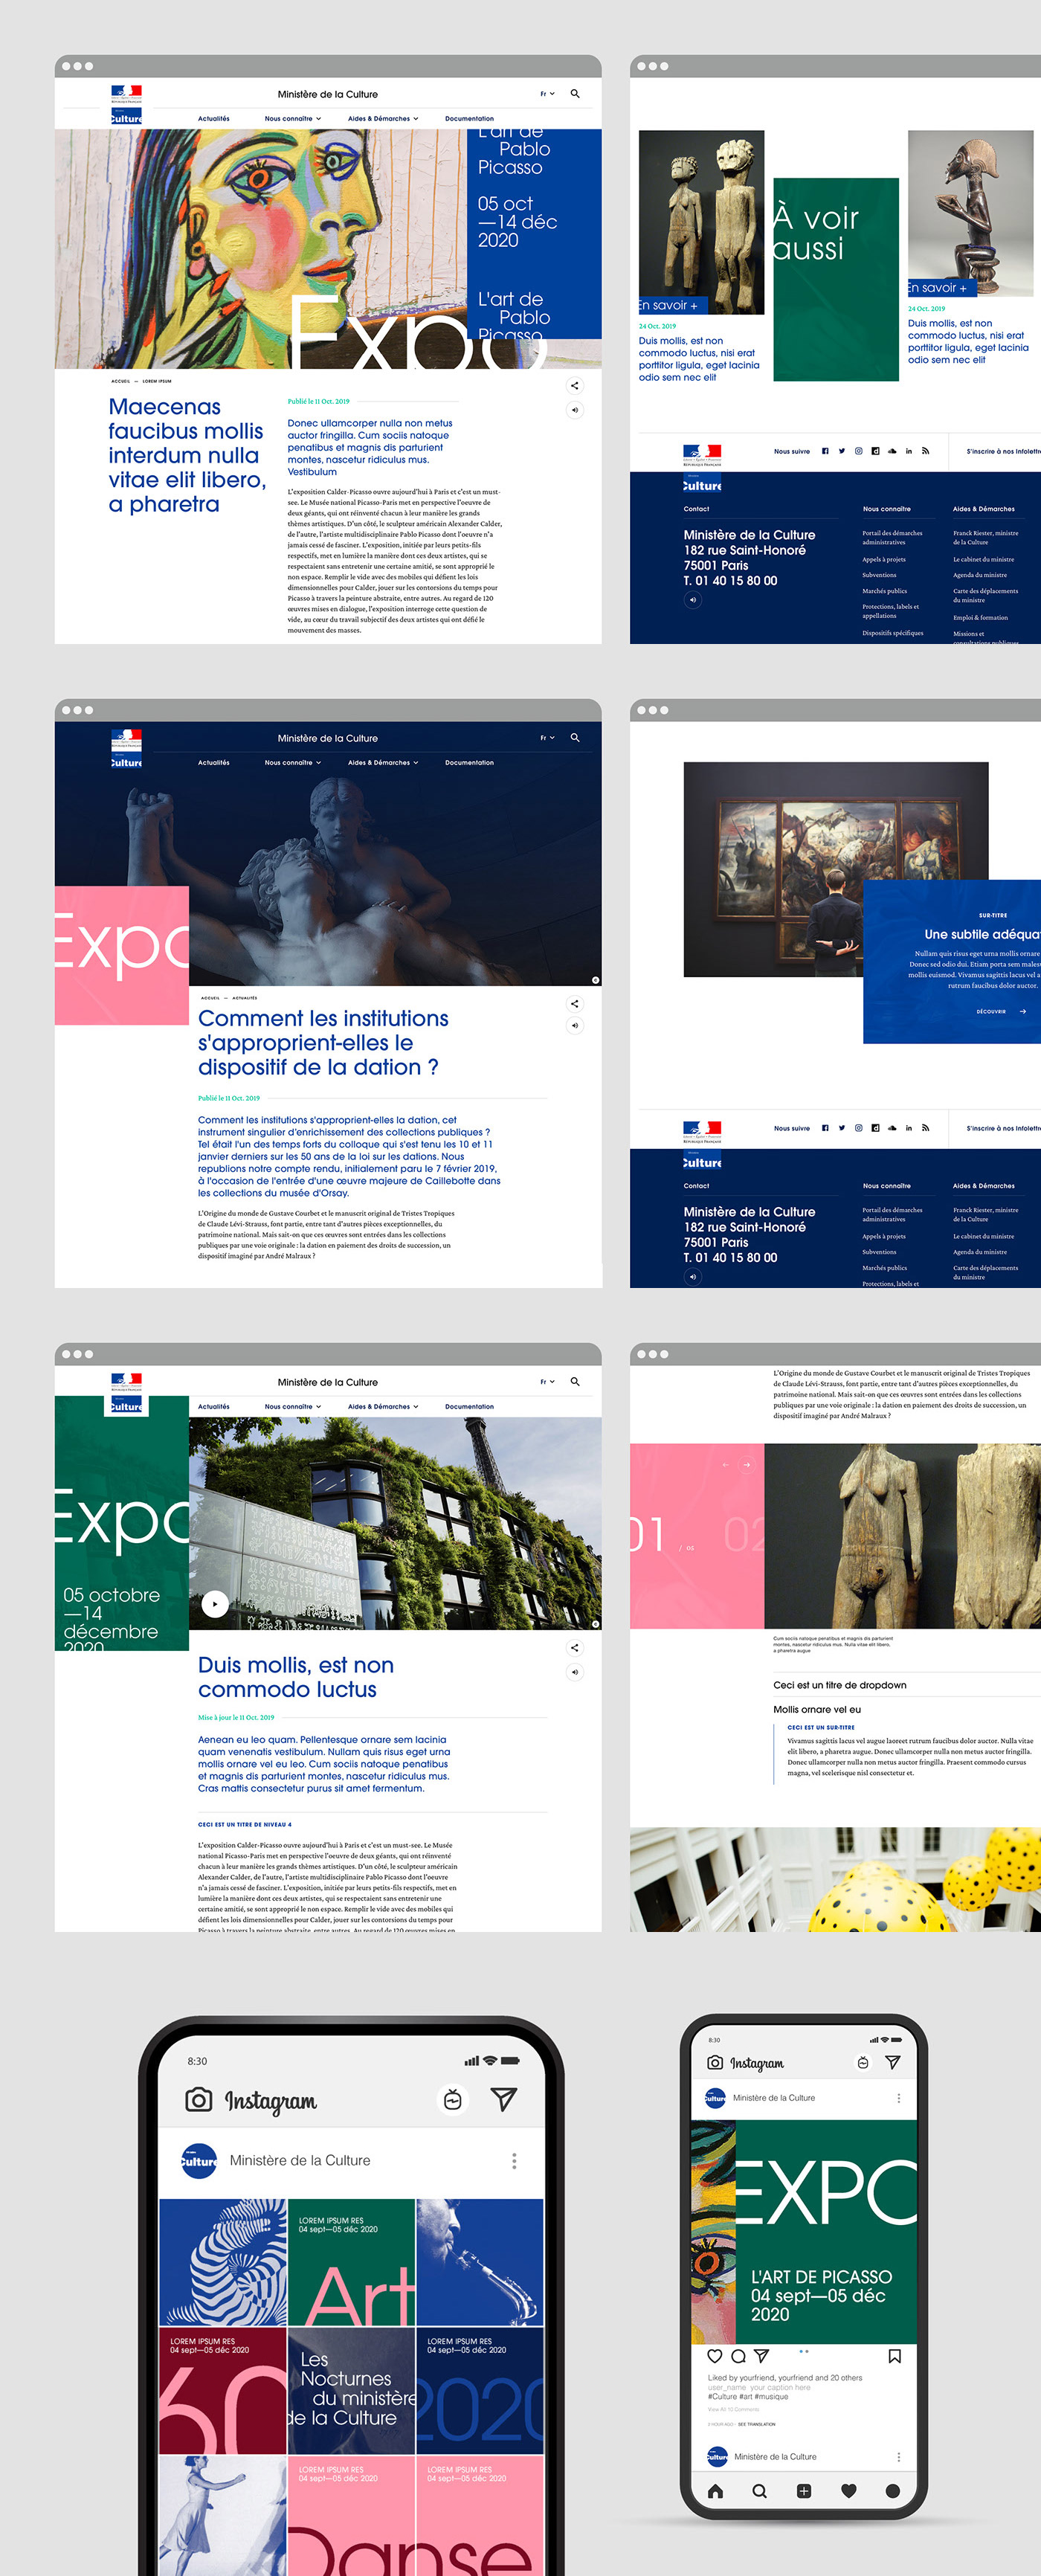 Visual identity design by Graphéine for French Ministry of Culture.